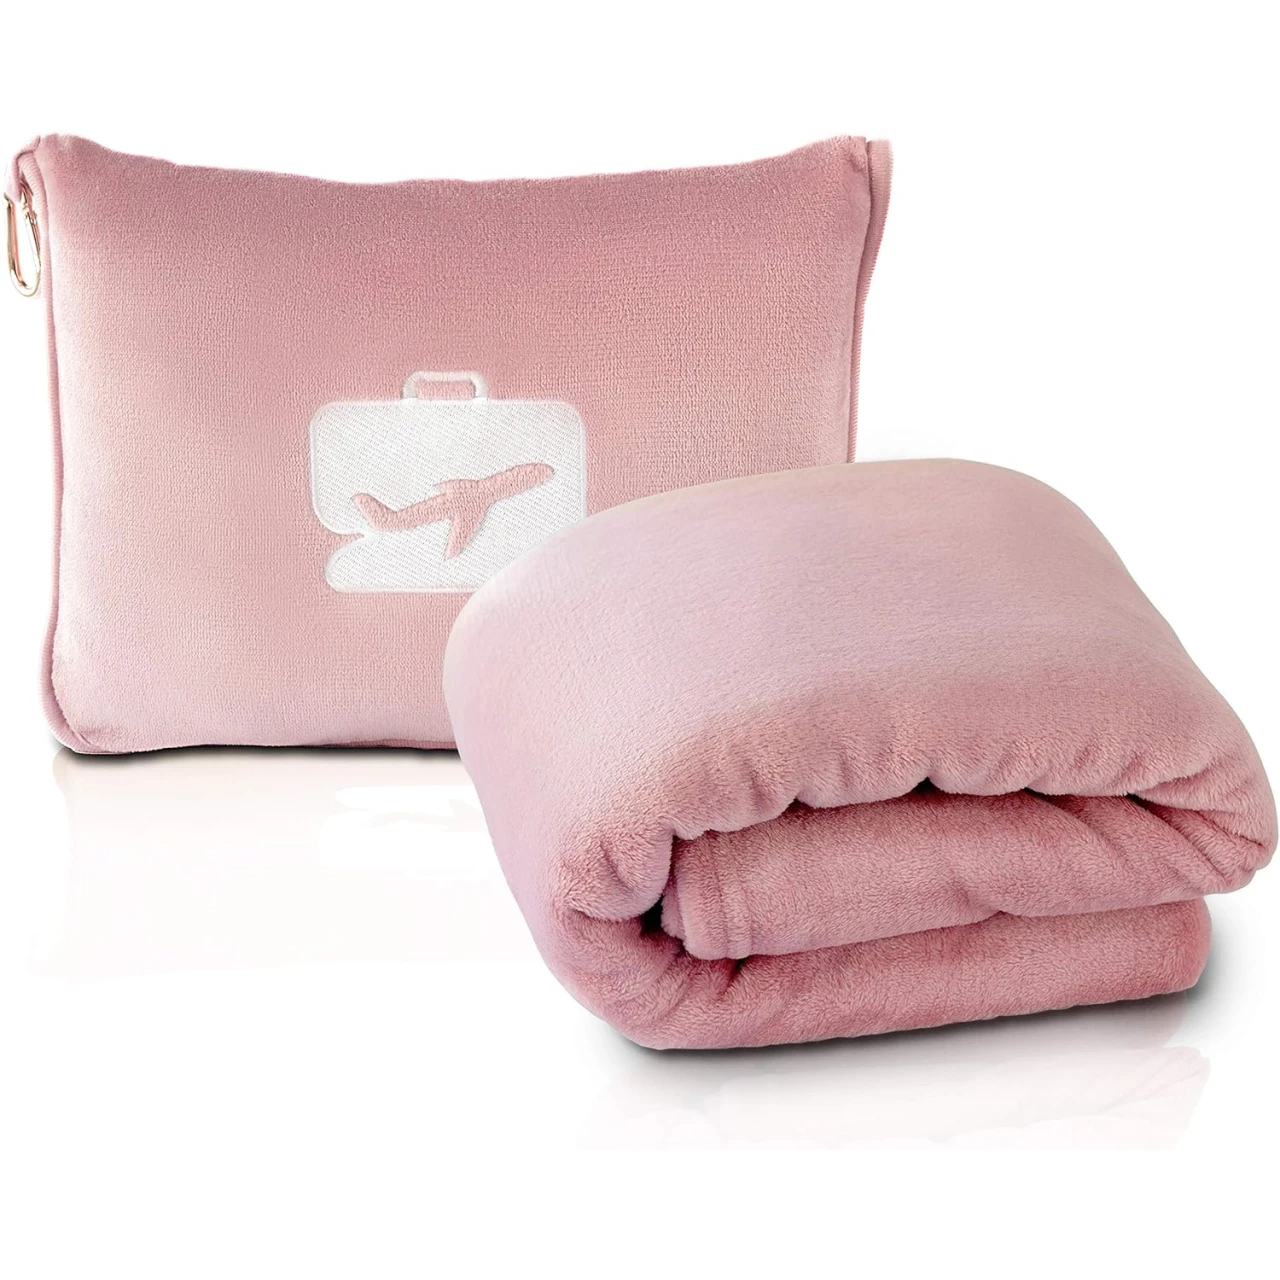 EverSnug Travel Blanket and Pillow - Premium Soft 2 in 1 Airplane Blanket with Soft Bag Pillowcase (Light Pink)